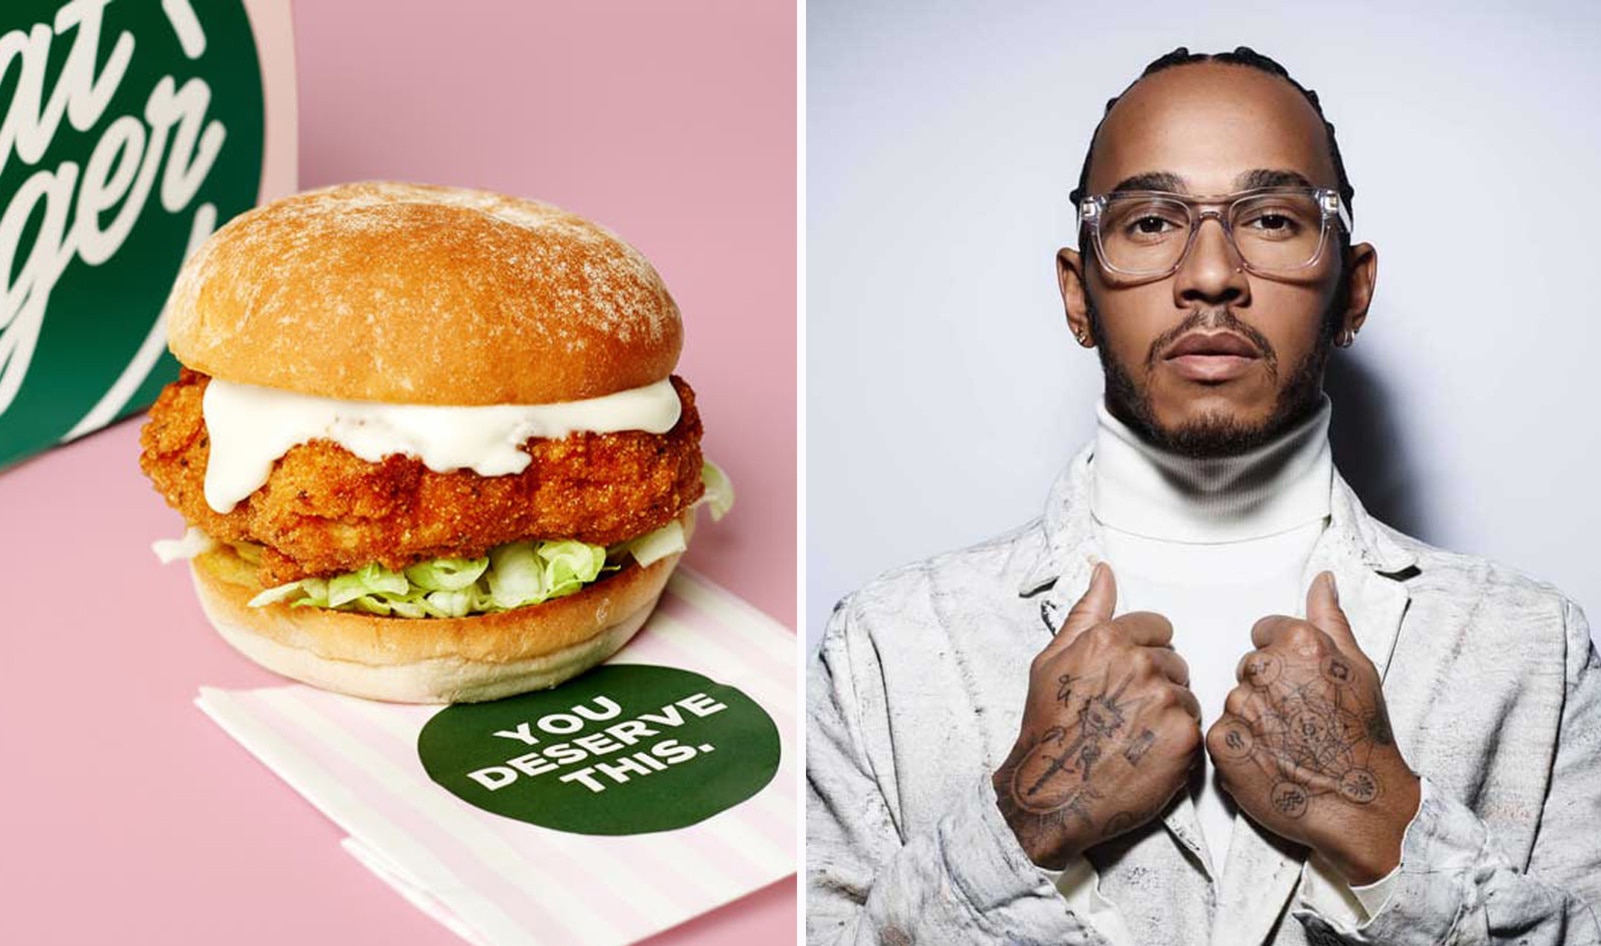 Lewis Hamilton’s Vegan Burger Chain to Open 7 More London Locations and 20 Delivery-Only Outposts